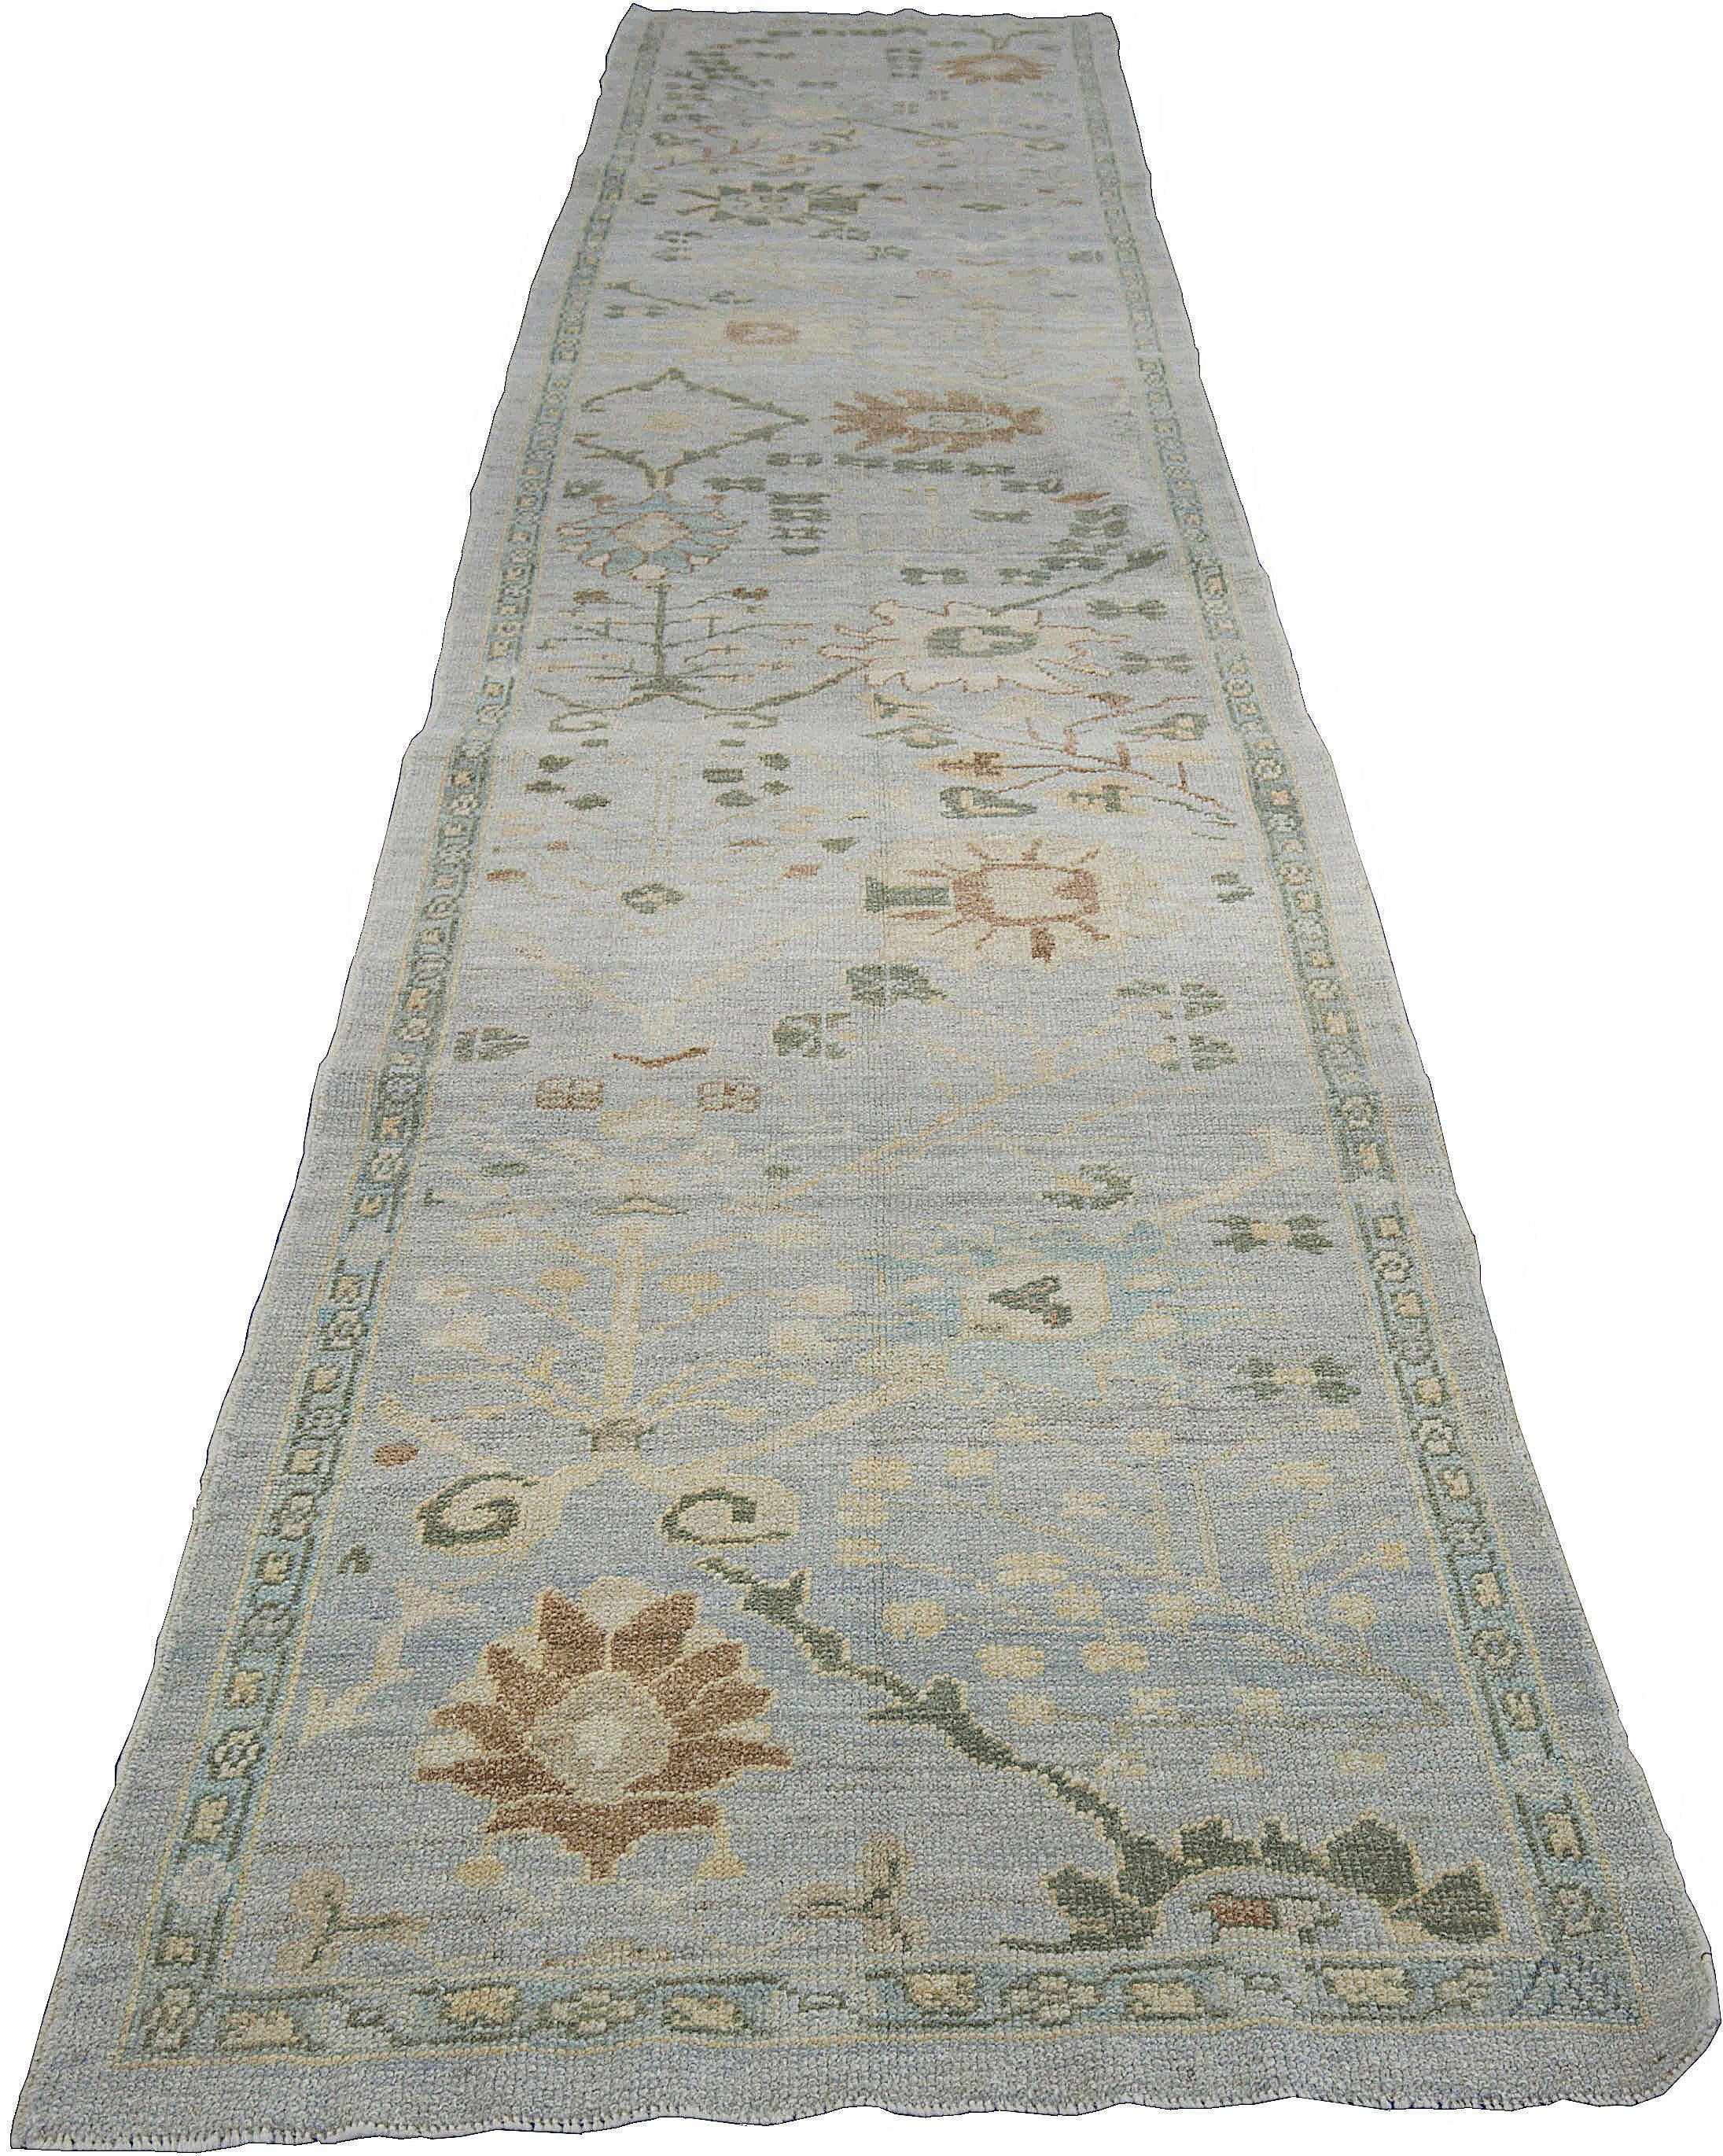 Modern Turkish rug made of handwoven sheep’s wool of the finest quality. It’s colored with organic vegetable dyes that are certified safe for humans and pets alike. It features a lovely gray field with floral details in green, blue, and brown